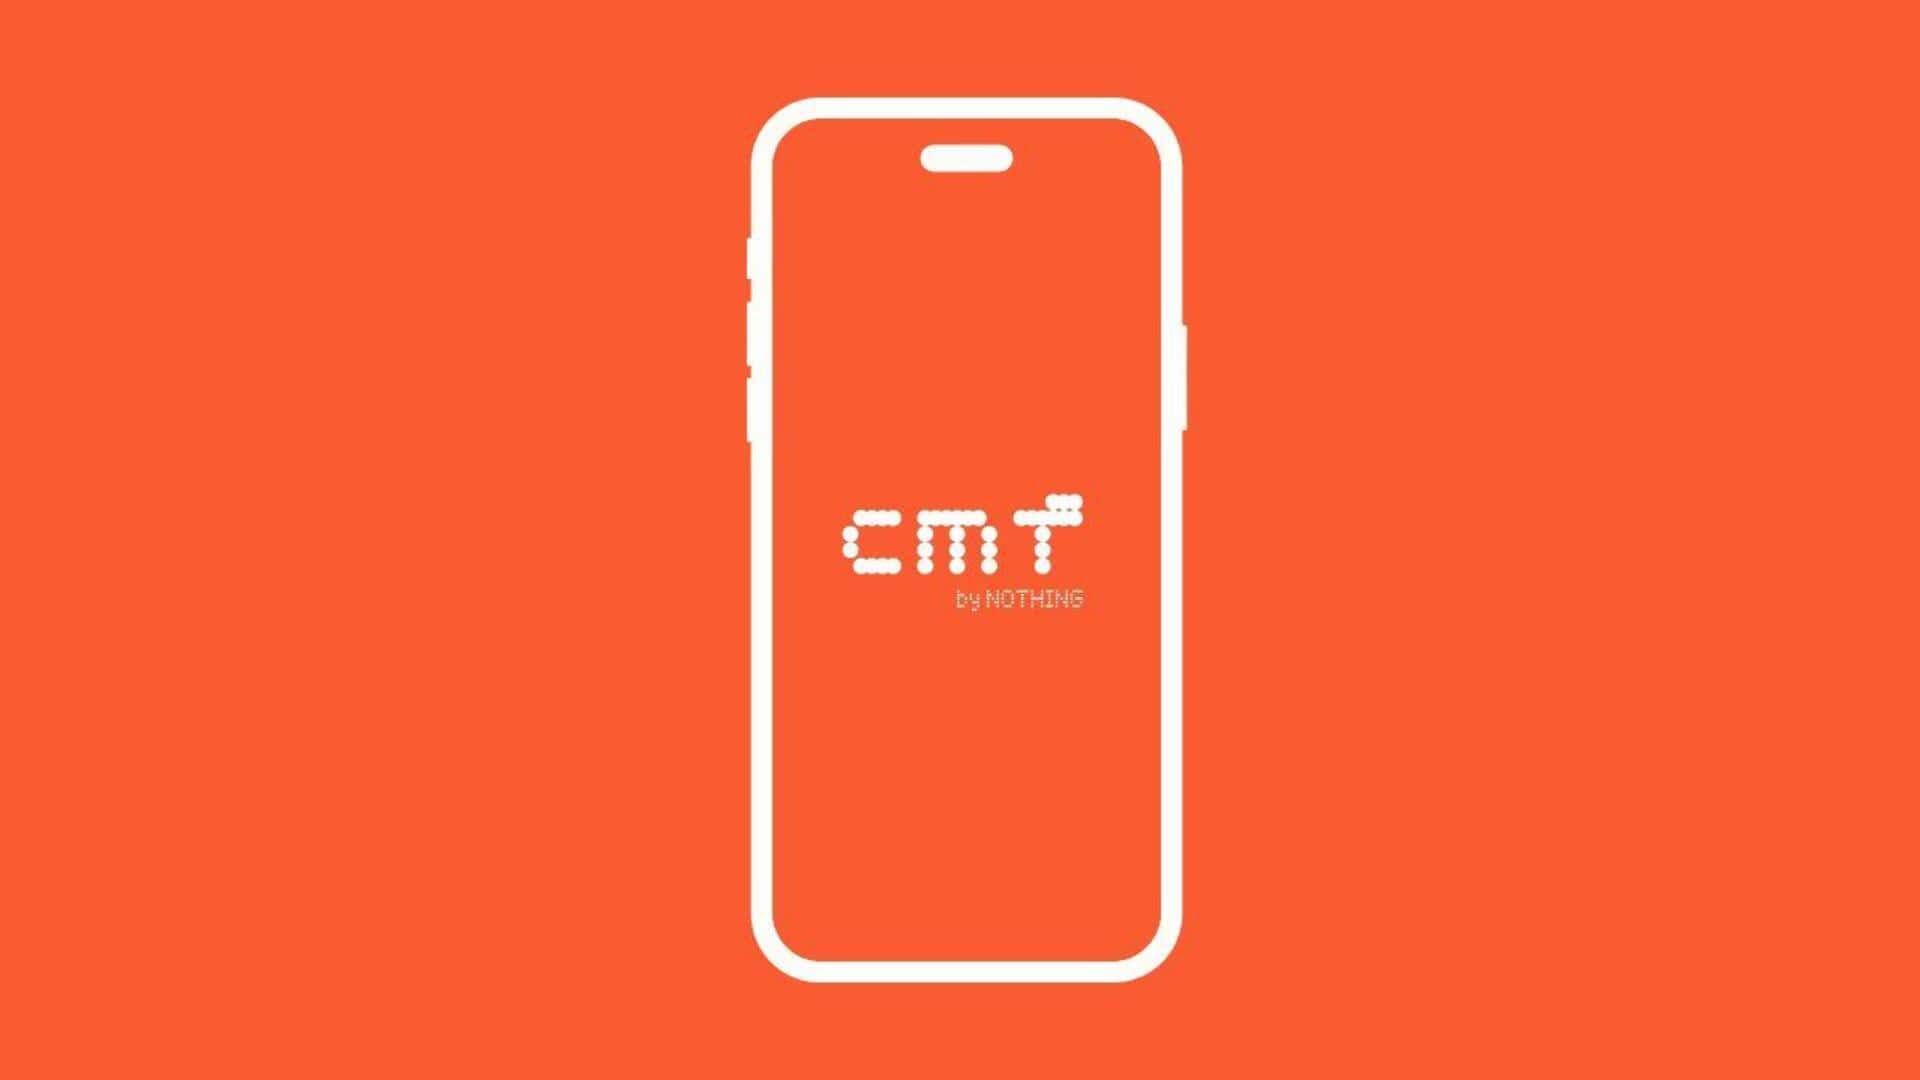 Nothing CMF Phone (1) to debut soon: Check rumored specs